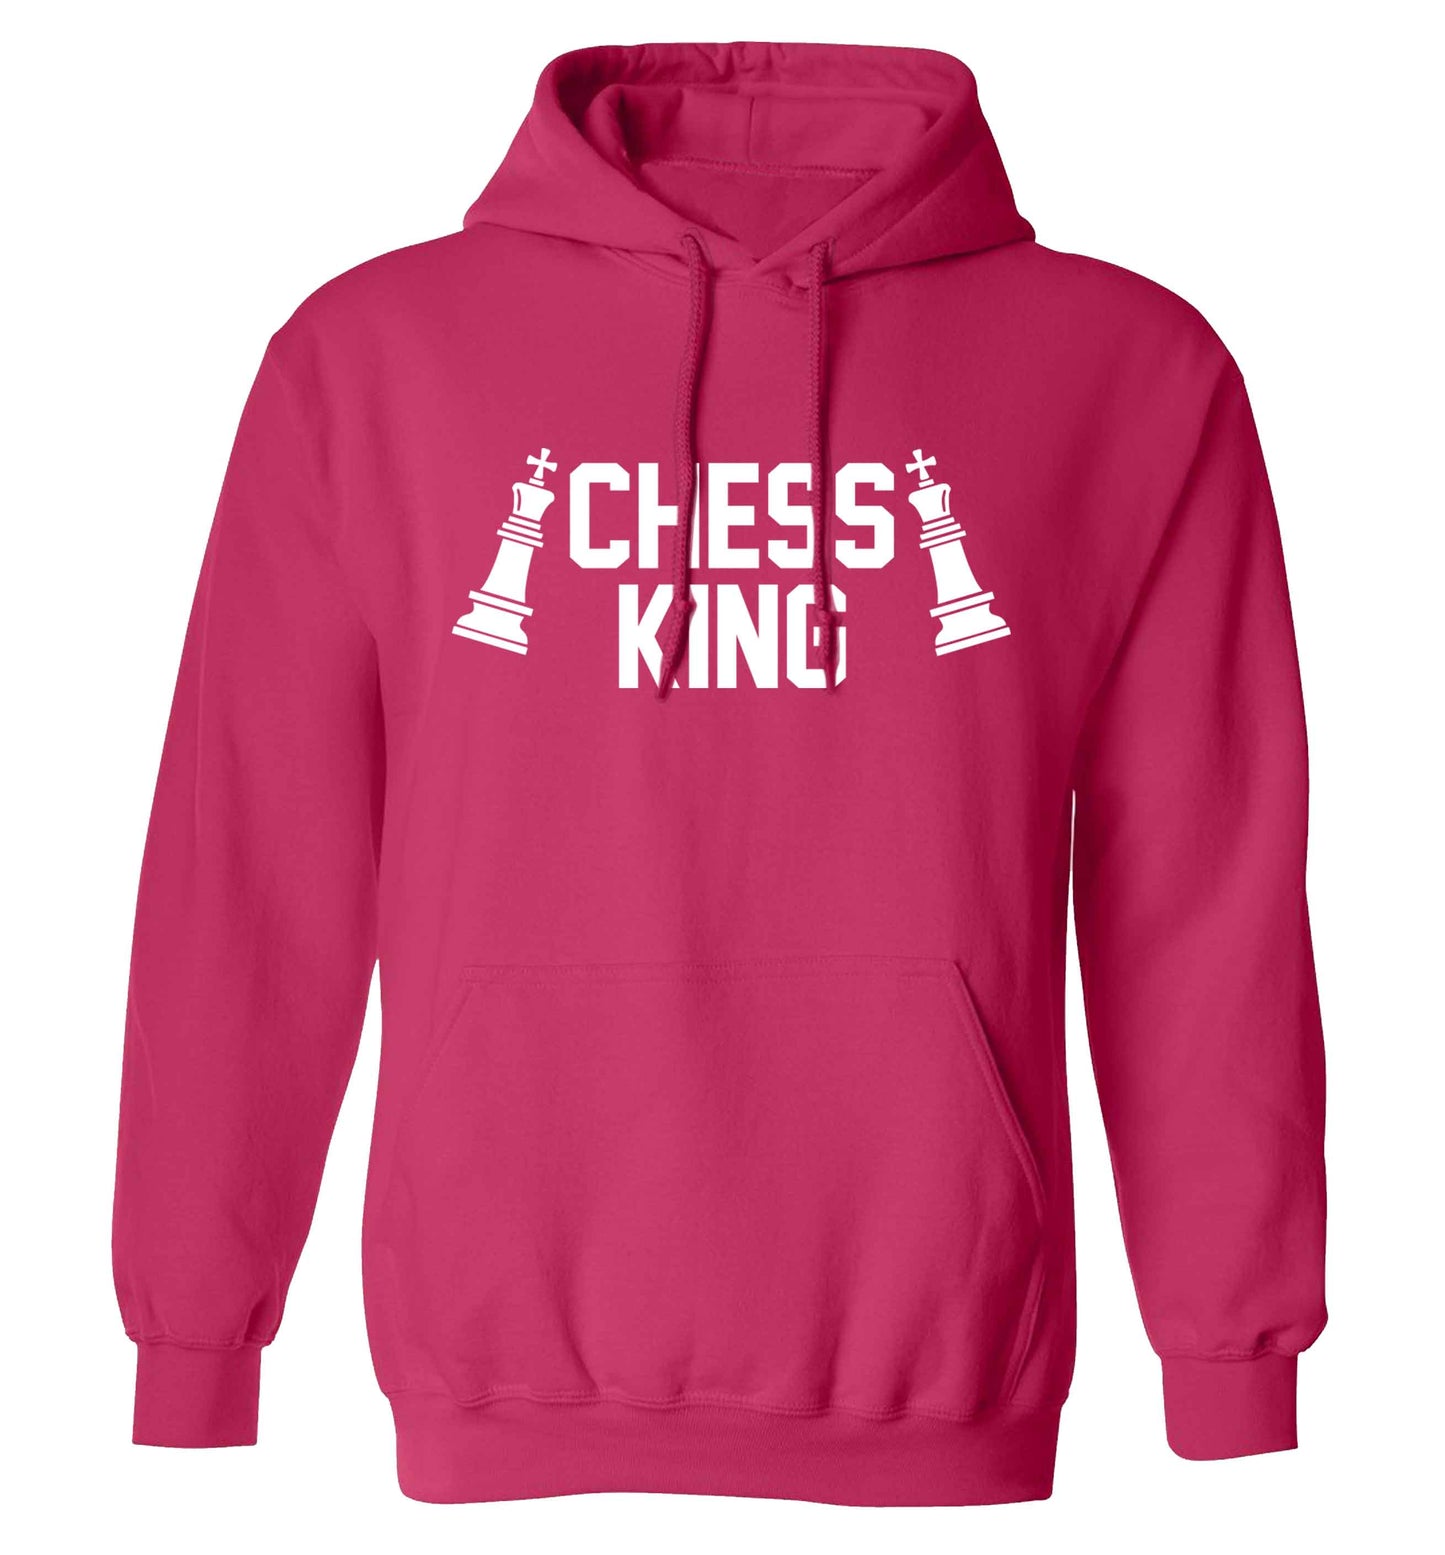 Chess king adults unisex pink hoodie 2XL